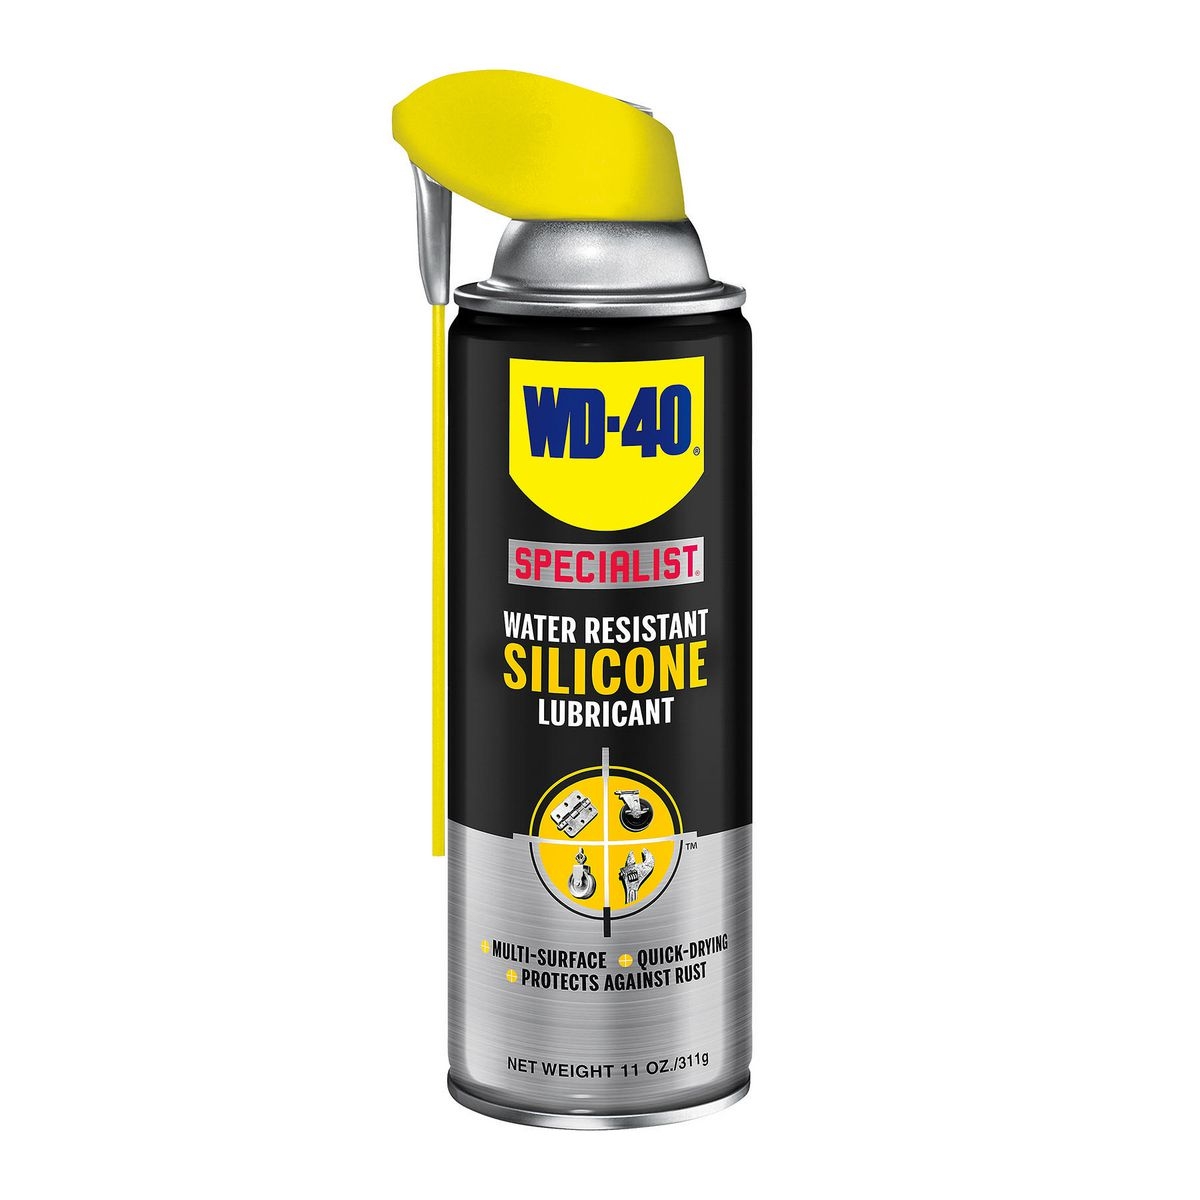 WD-40 Specialist Water Resistant Silicone Lubricant - Item 56868